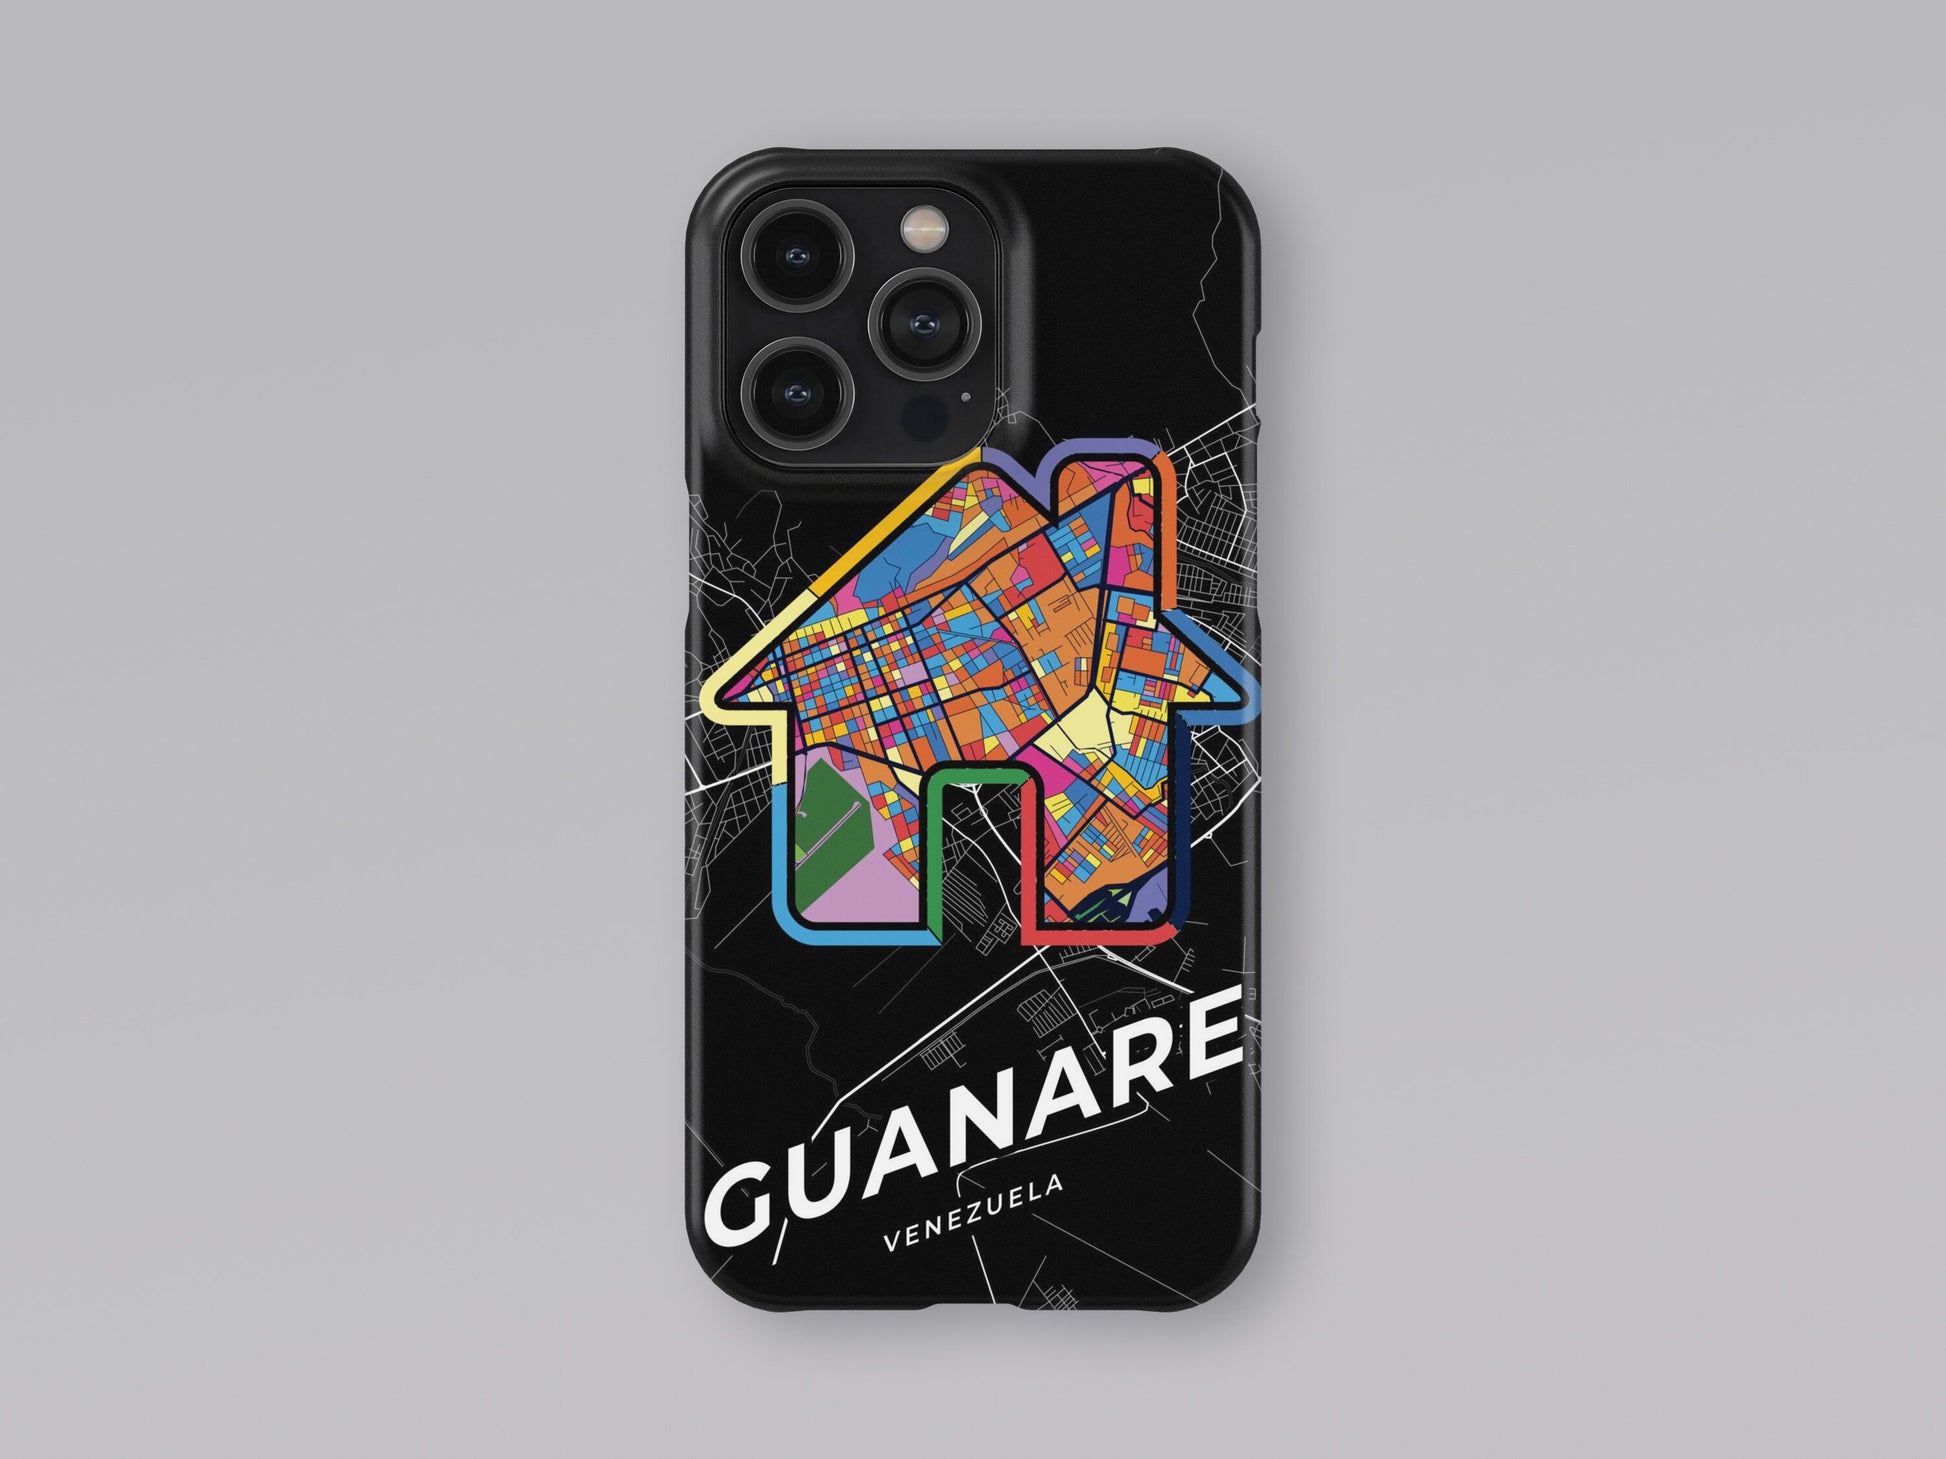 Guanare Venezuela slim phone case with colorful icon. Birthday, wedding or housewarming gift. Couple match cases. 3